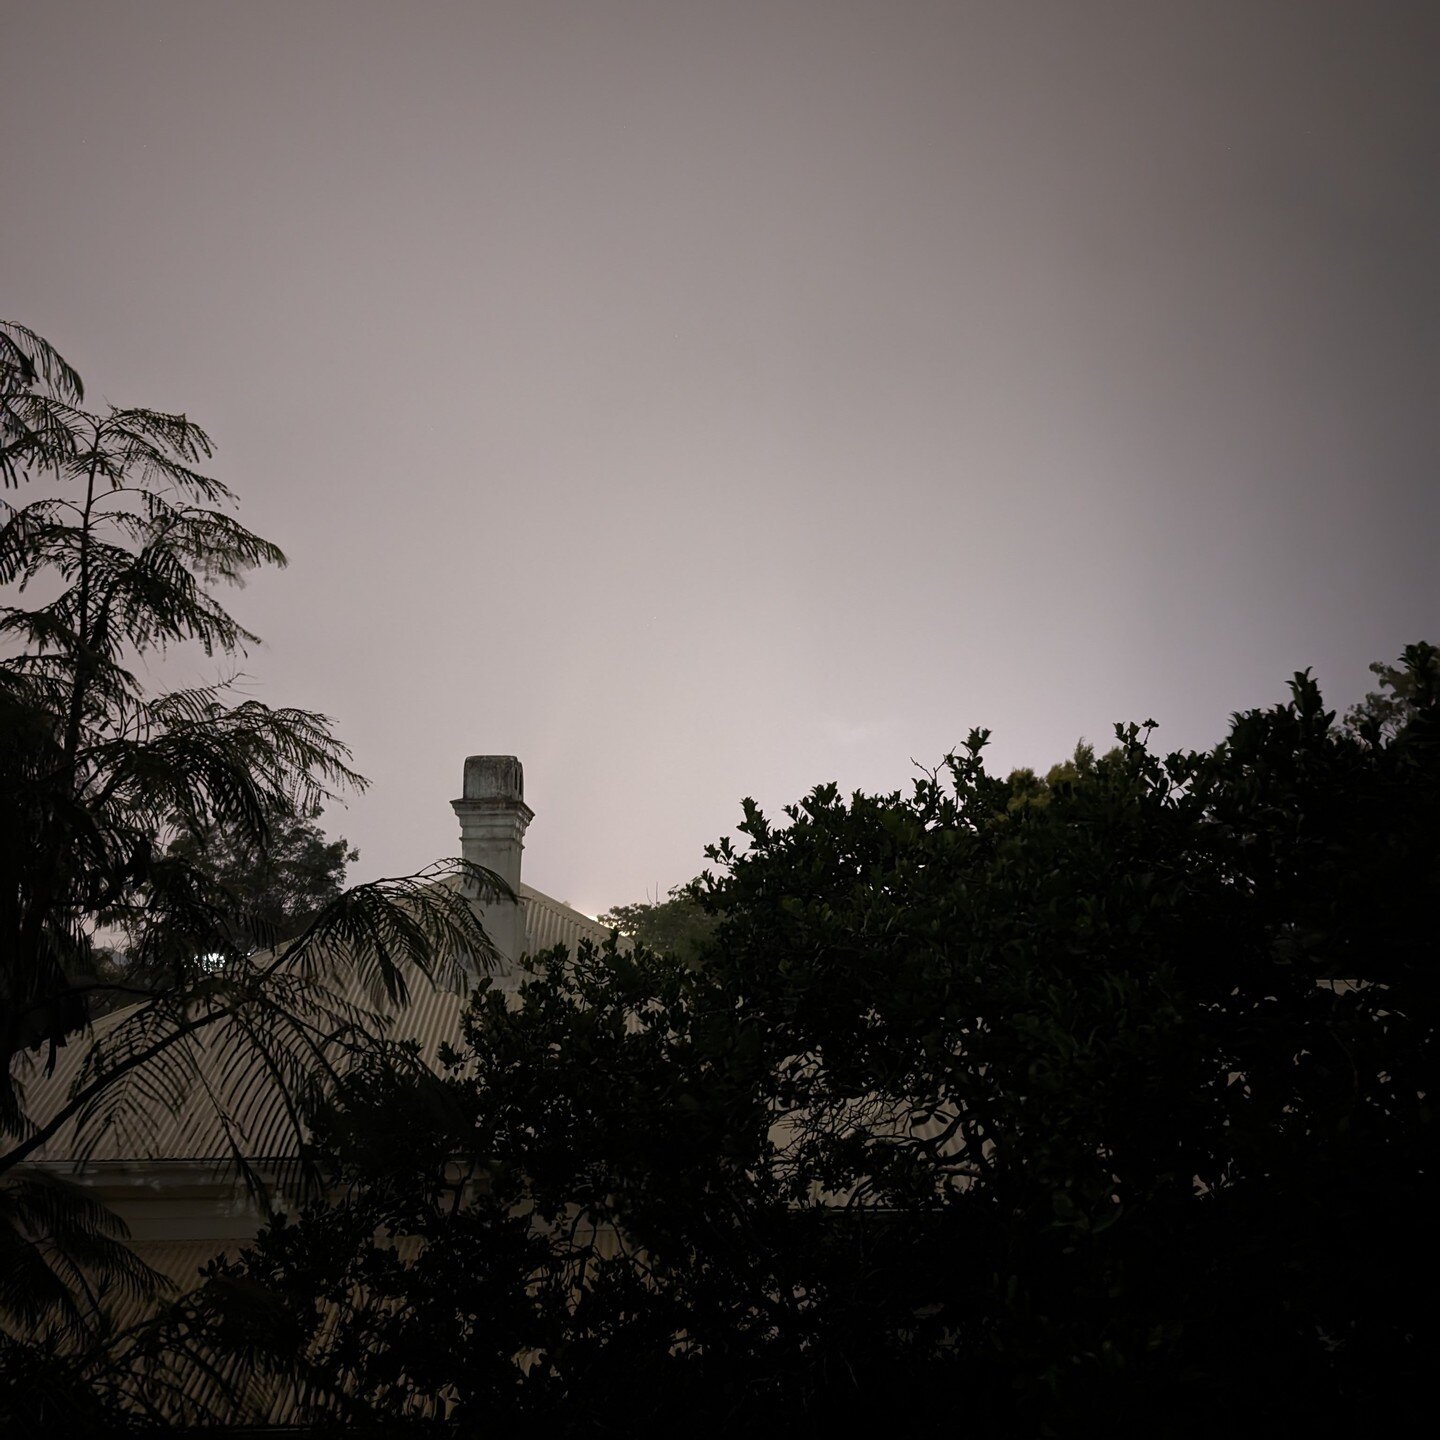 Night sight......

In Ipswich's embrace, rain whispers secrets tonight.

The sun bowed out beneath a tyrant's heat, a fierce surrender.

Then, the trees, those silent sentinels, began their dance outside my pane.

And in the finale, a downpour's grac